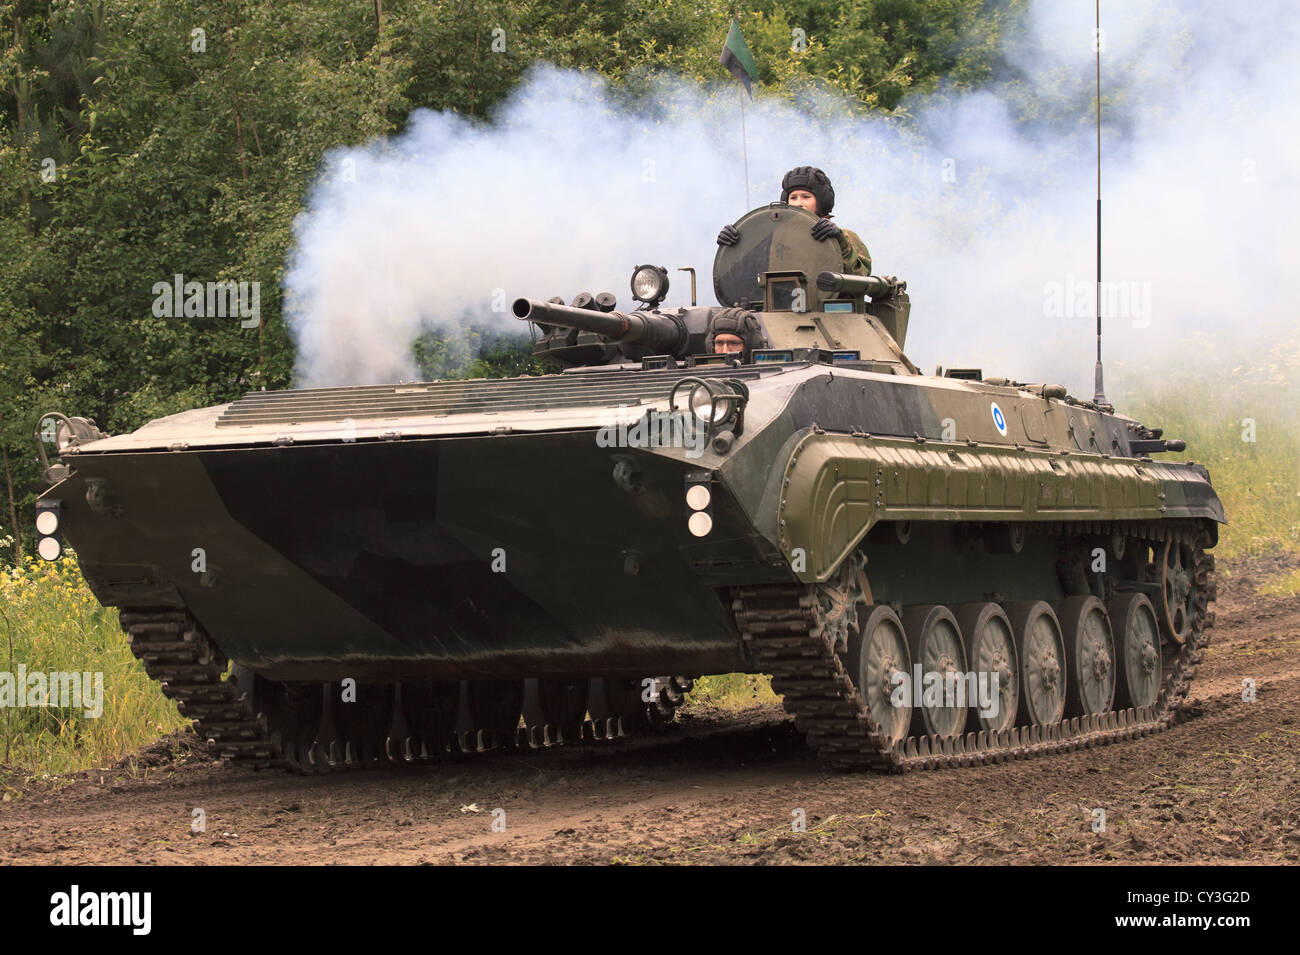 A Finnish Army BMP-2 infantry fighting vehicle revving its engine with a  plume of exhaust smoke Stock Photo - Alamy